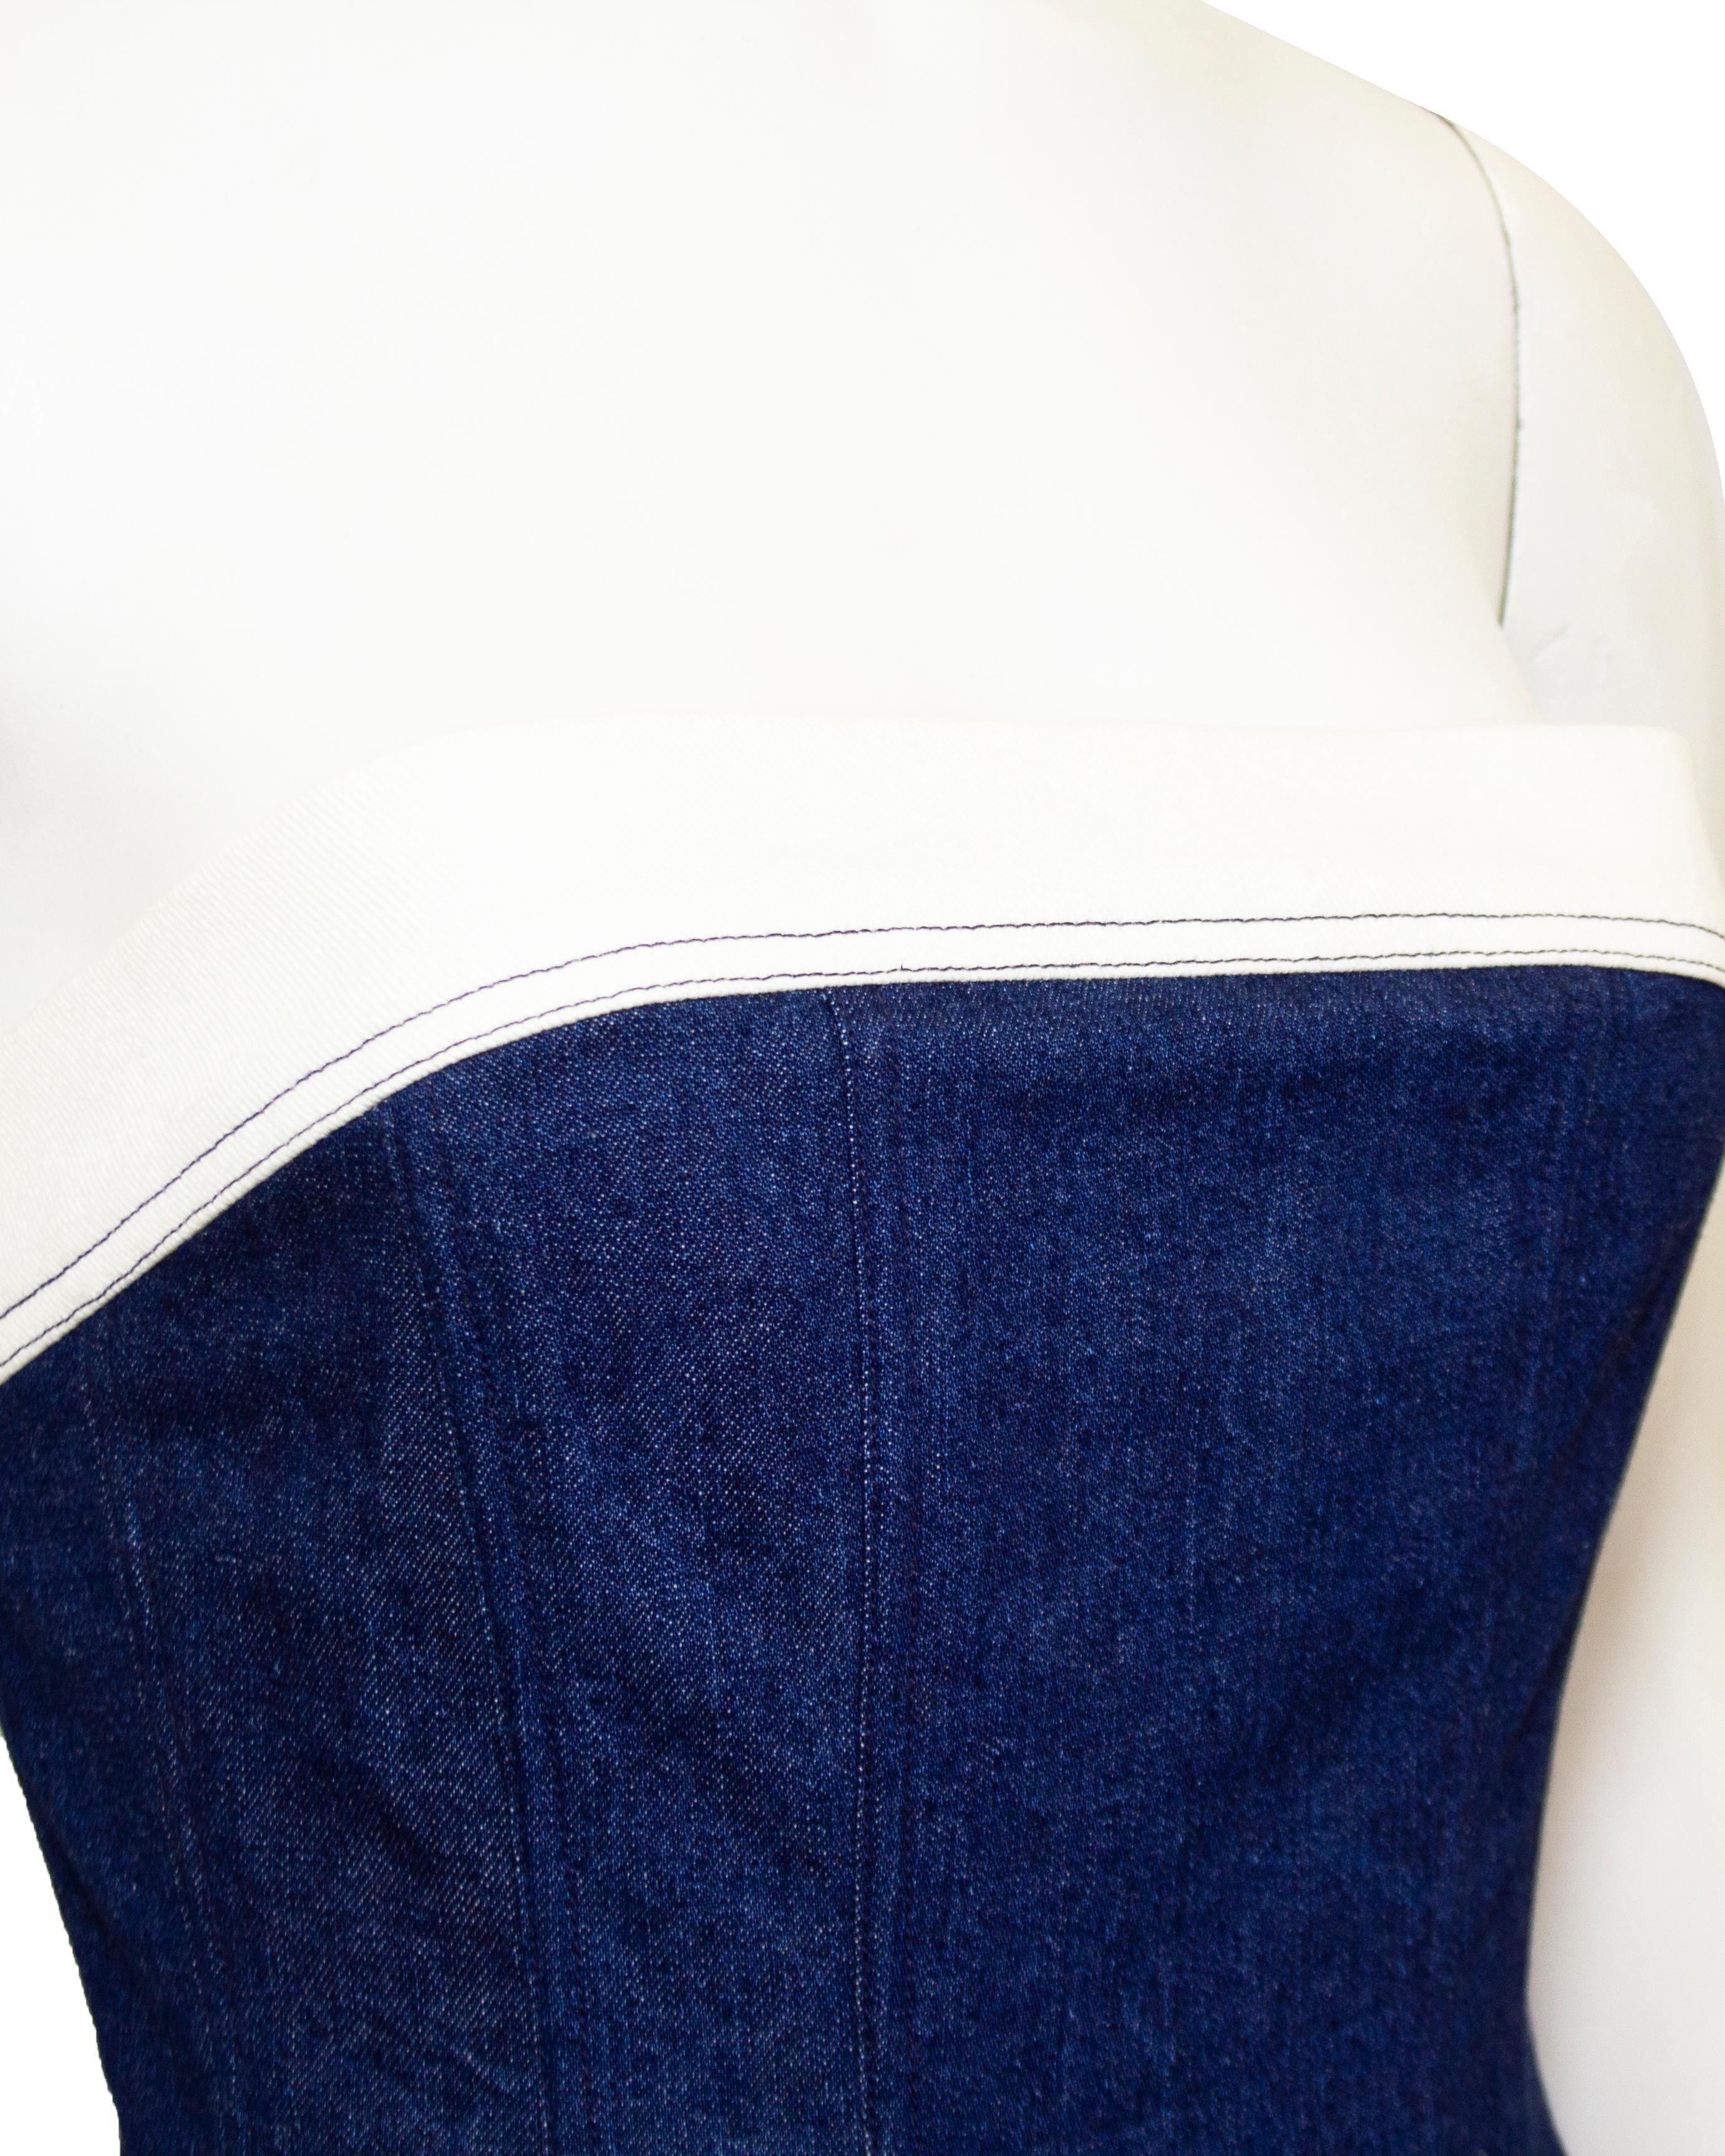 1990s Chanel Blue and White Denim Strapless Top & Skirt Ensemble In Good Condition For Sale In Toronto, Ontario